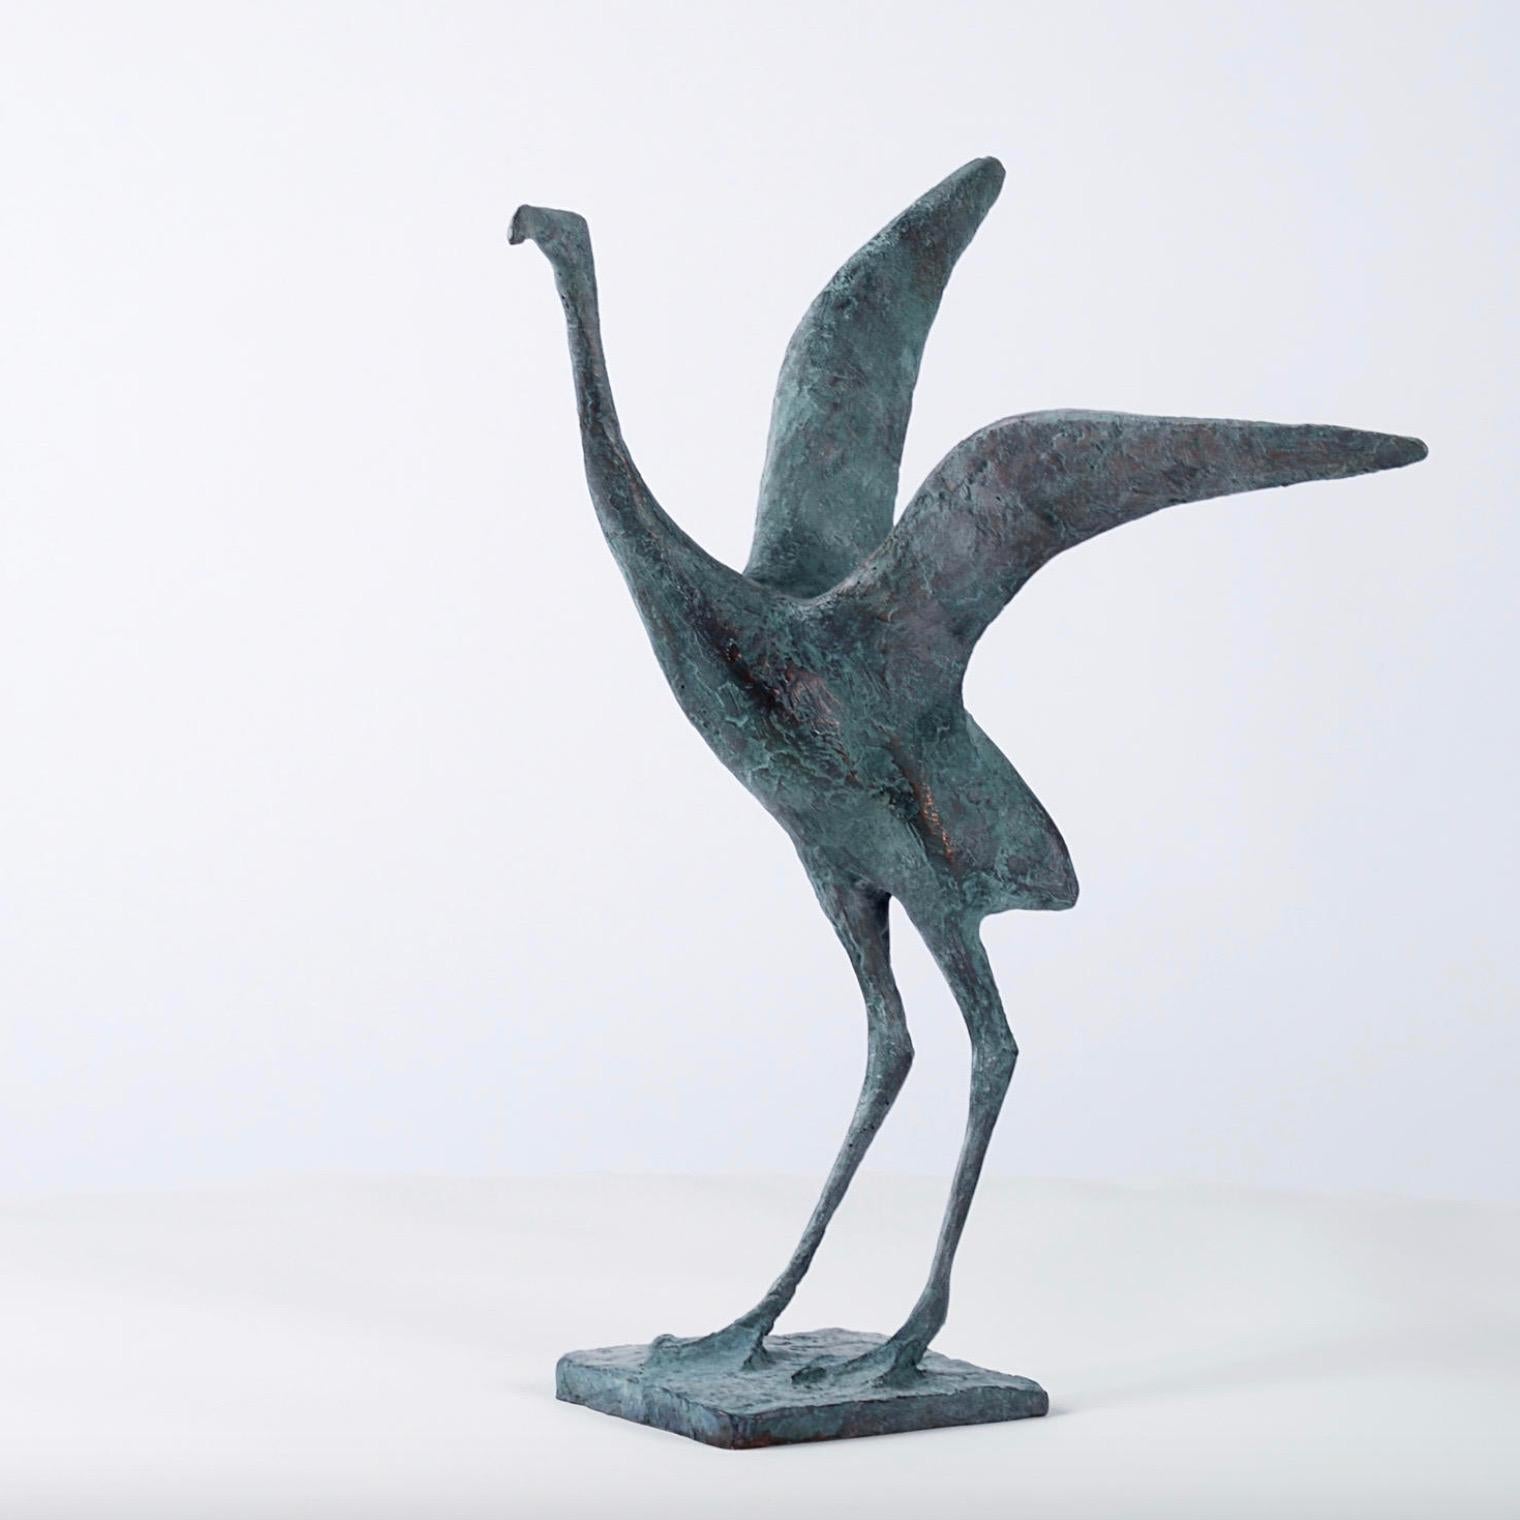 Flight V is a bronze sculpture by French contemporary artist Pierre Yermia, dimensions are 37 cm × 33 cm × 26 cm (14.6 × 13 × 10.2 in). The sculpture is signed and numbered, it is part of a limited edition of 8 editions + 4 artist’s proofs, and